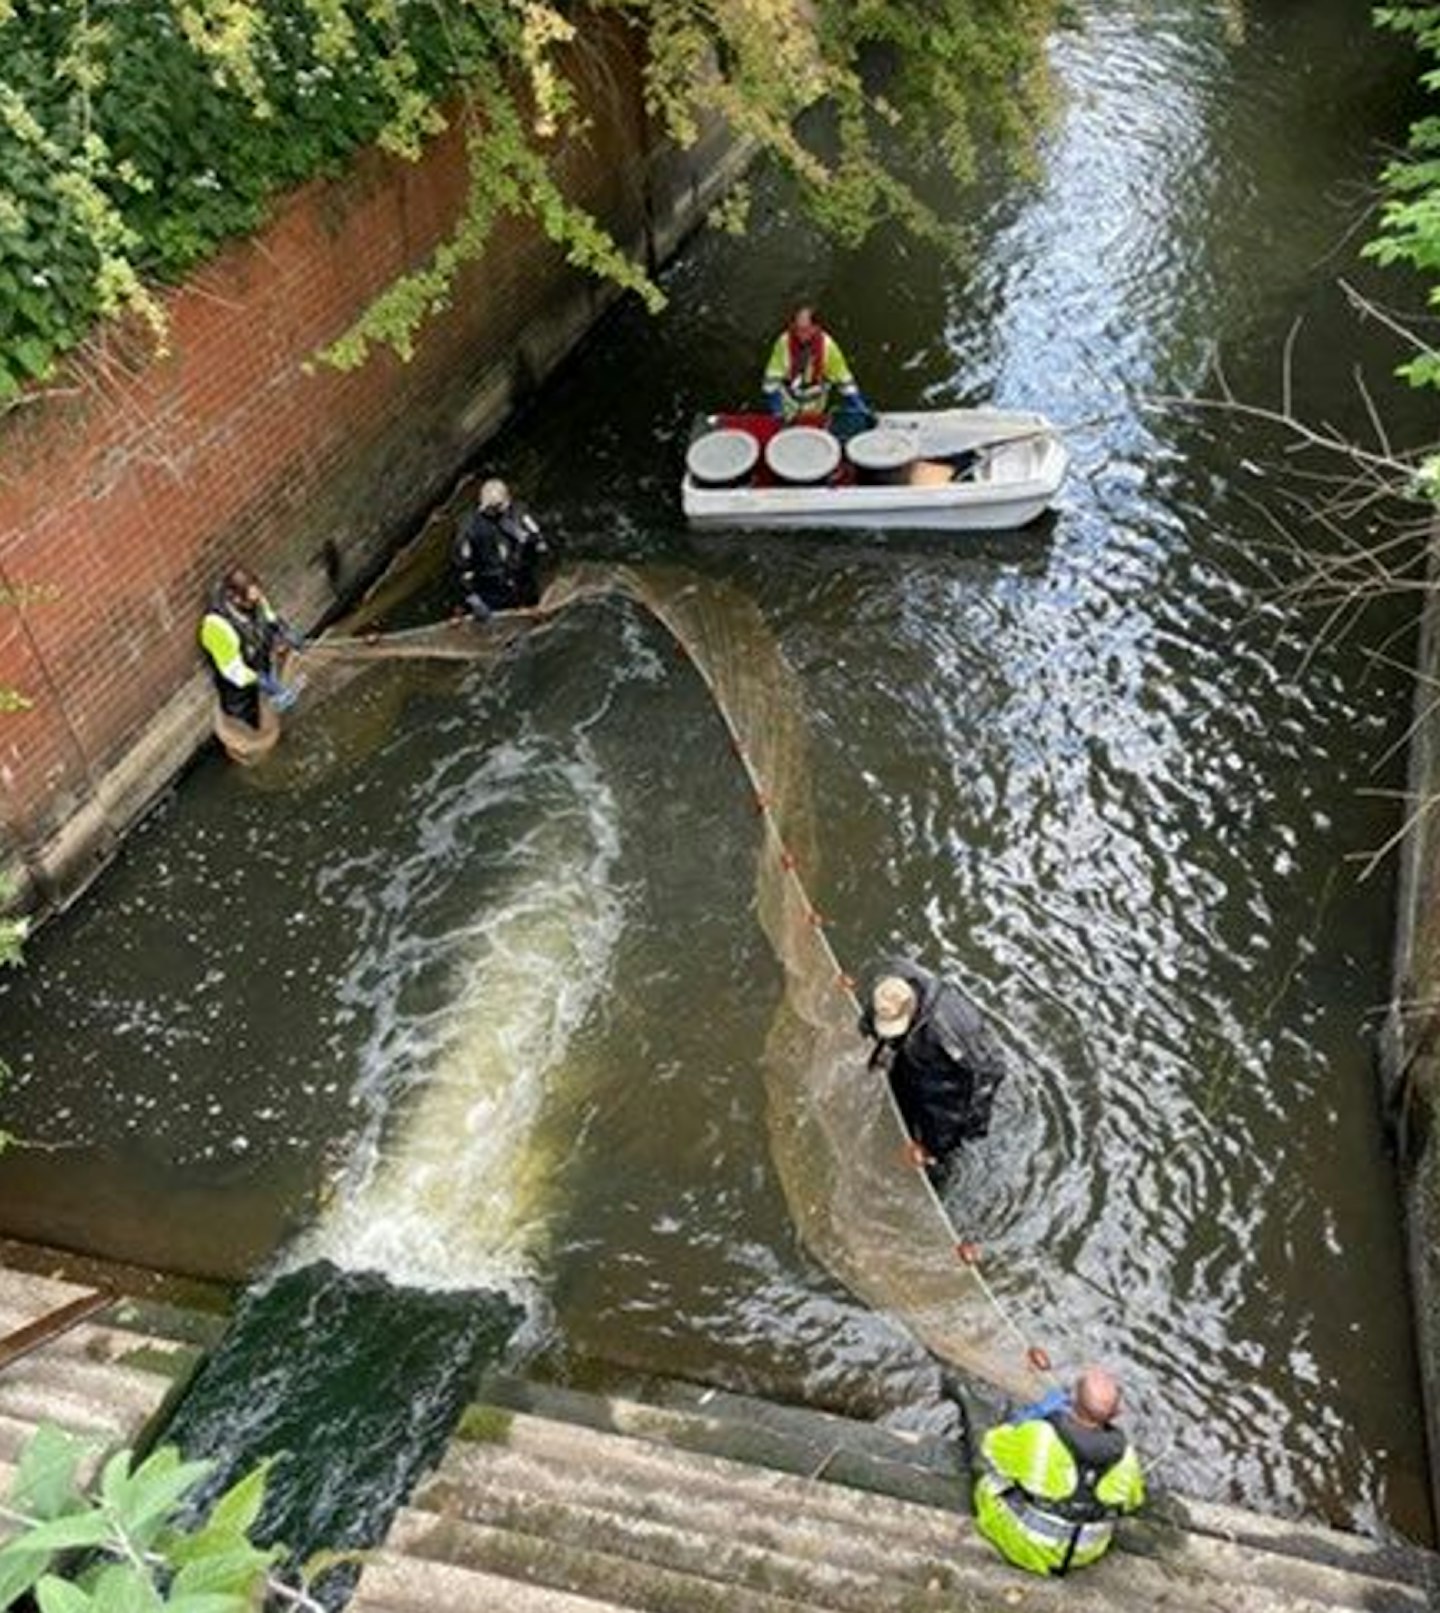 Fishery officers from the EA carried out a rapid rescue at one of the North West’s most popular bream waters